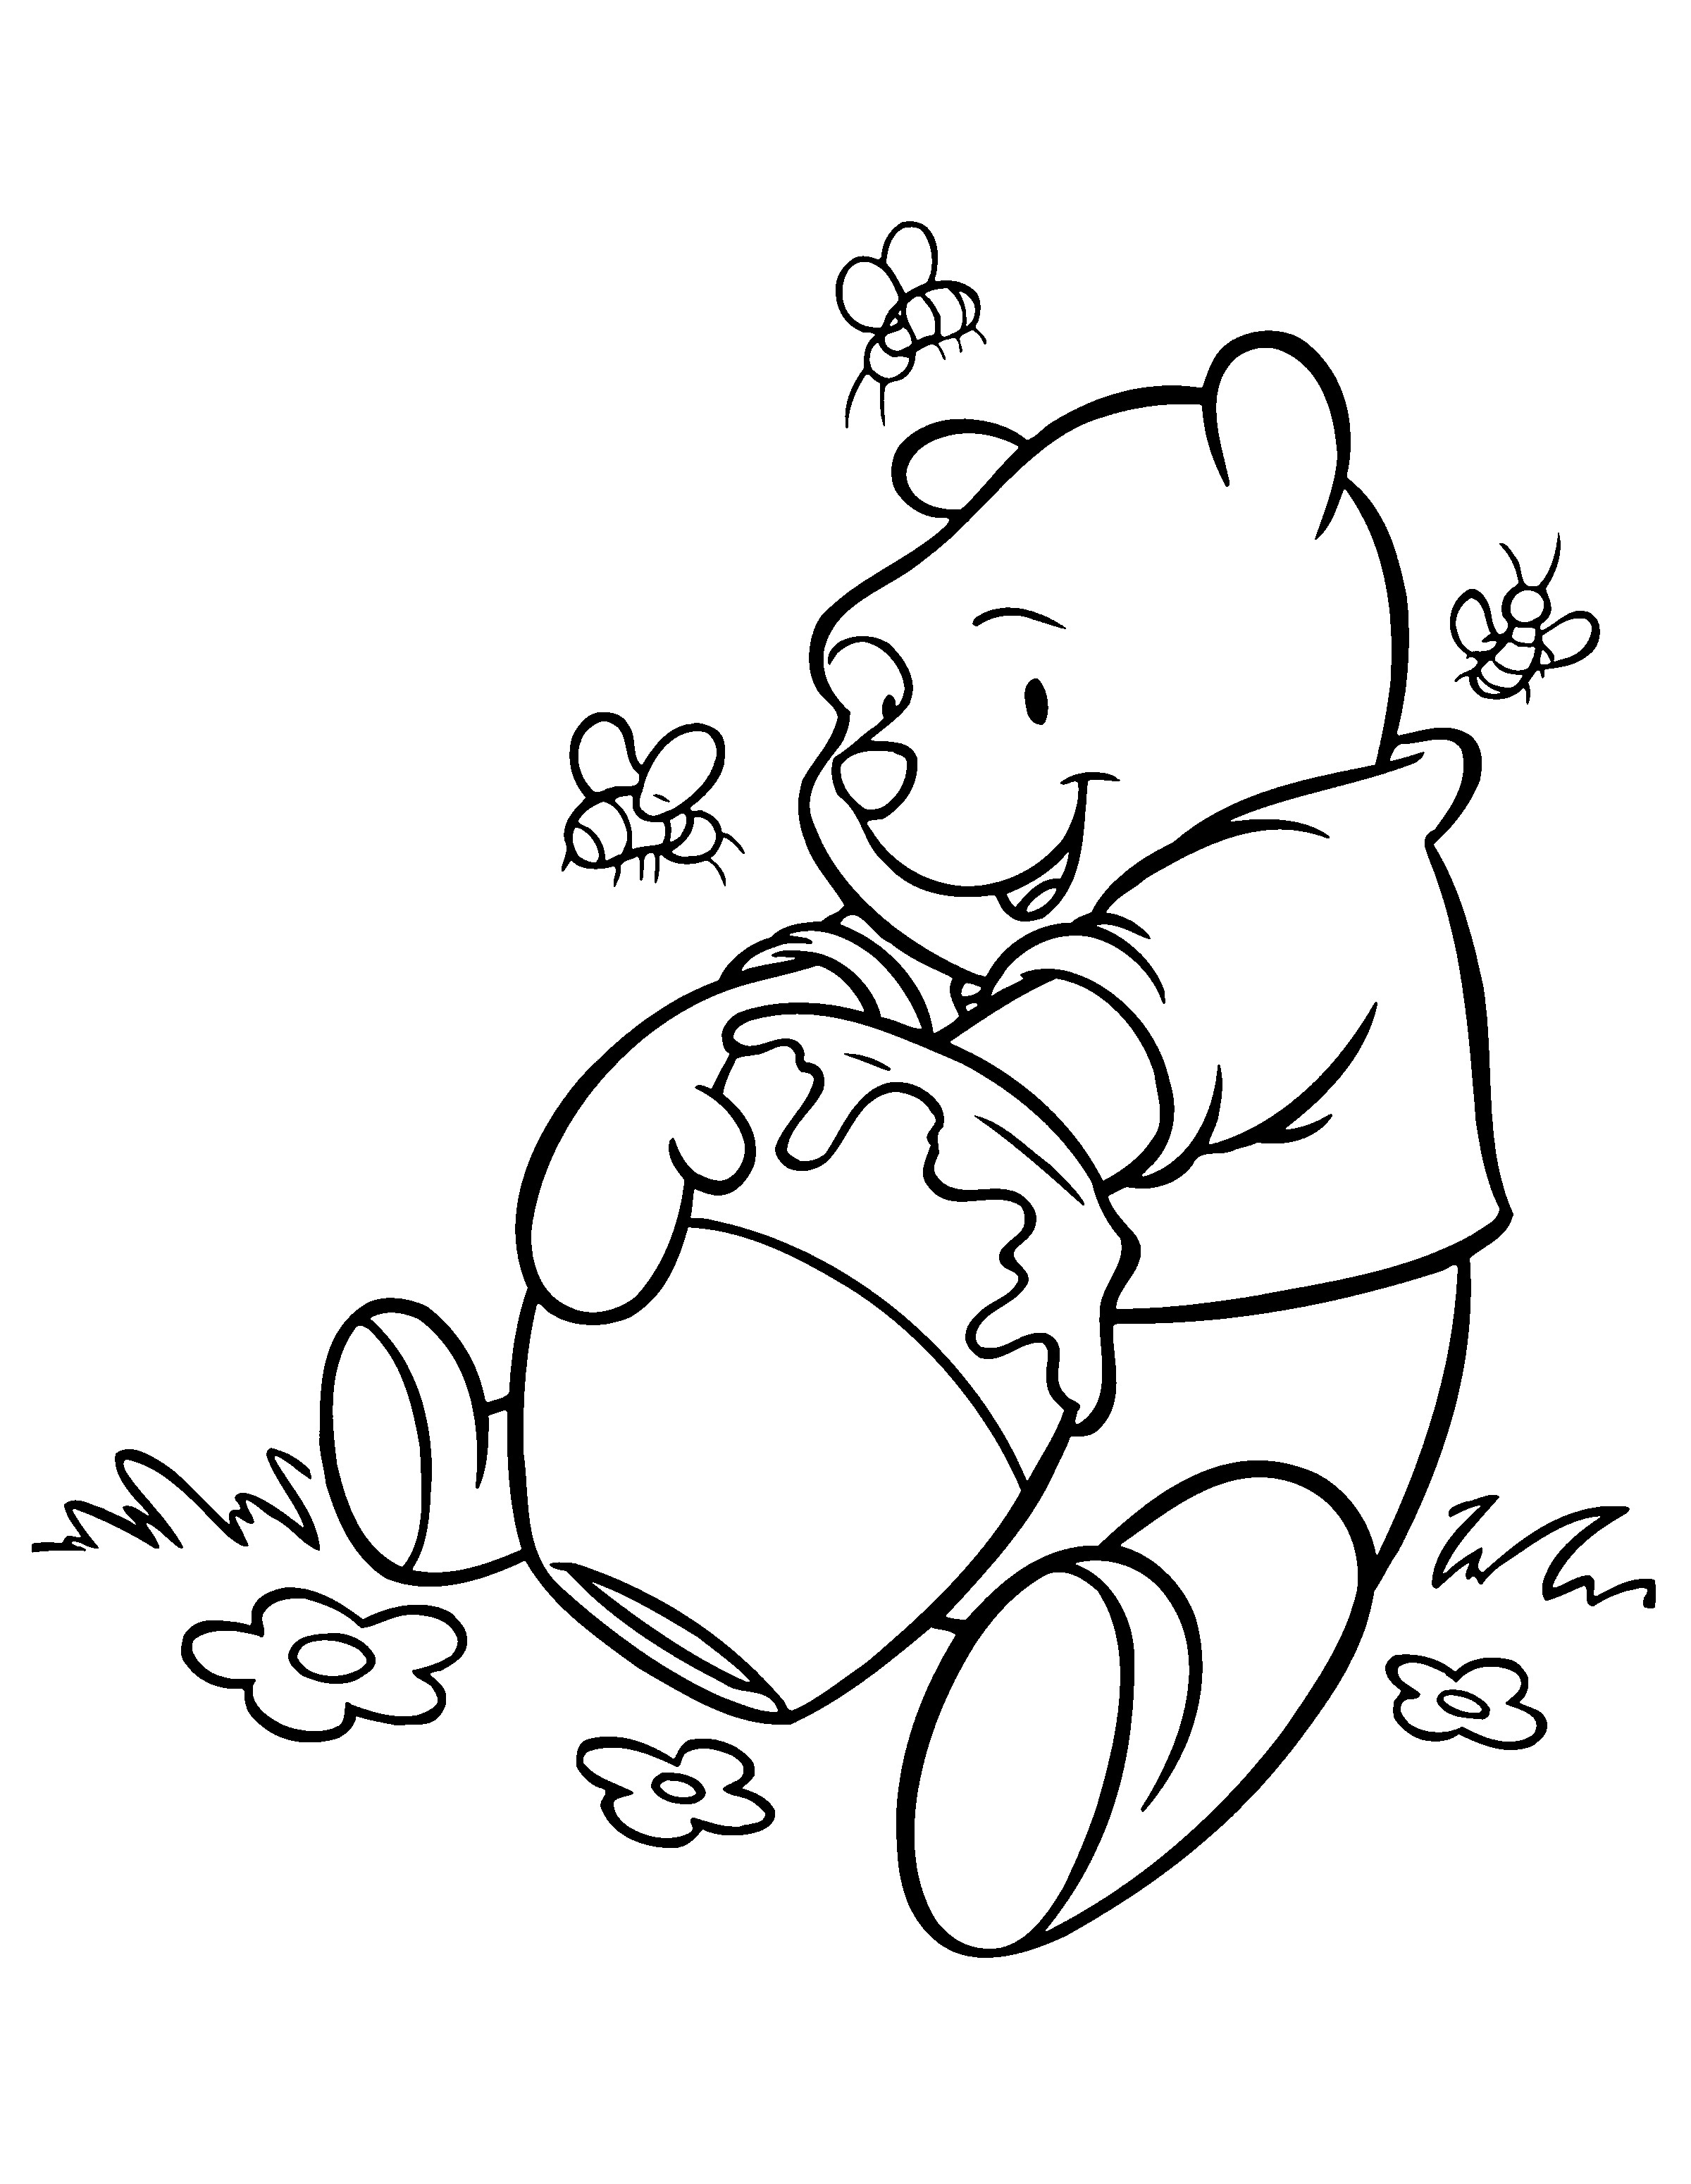 Coloring Book Pages Winnie The Pooh
 Free Printable Winnie The Pooh Coloring Pages For Kids